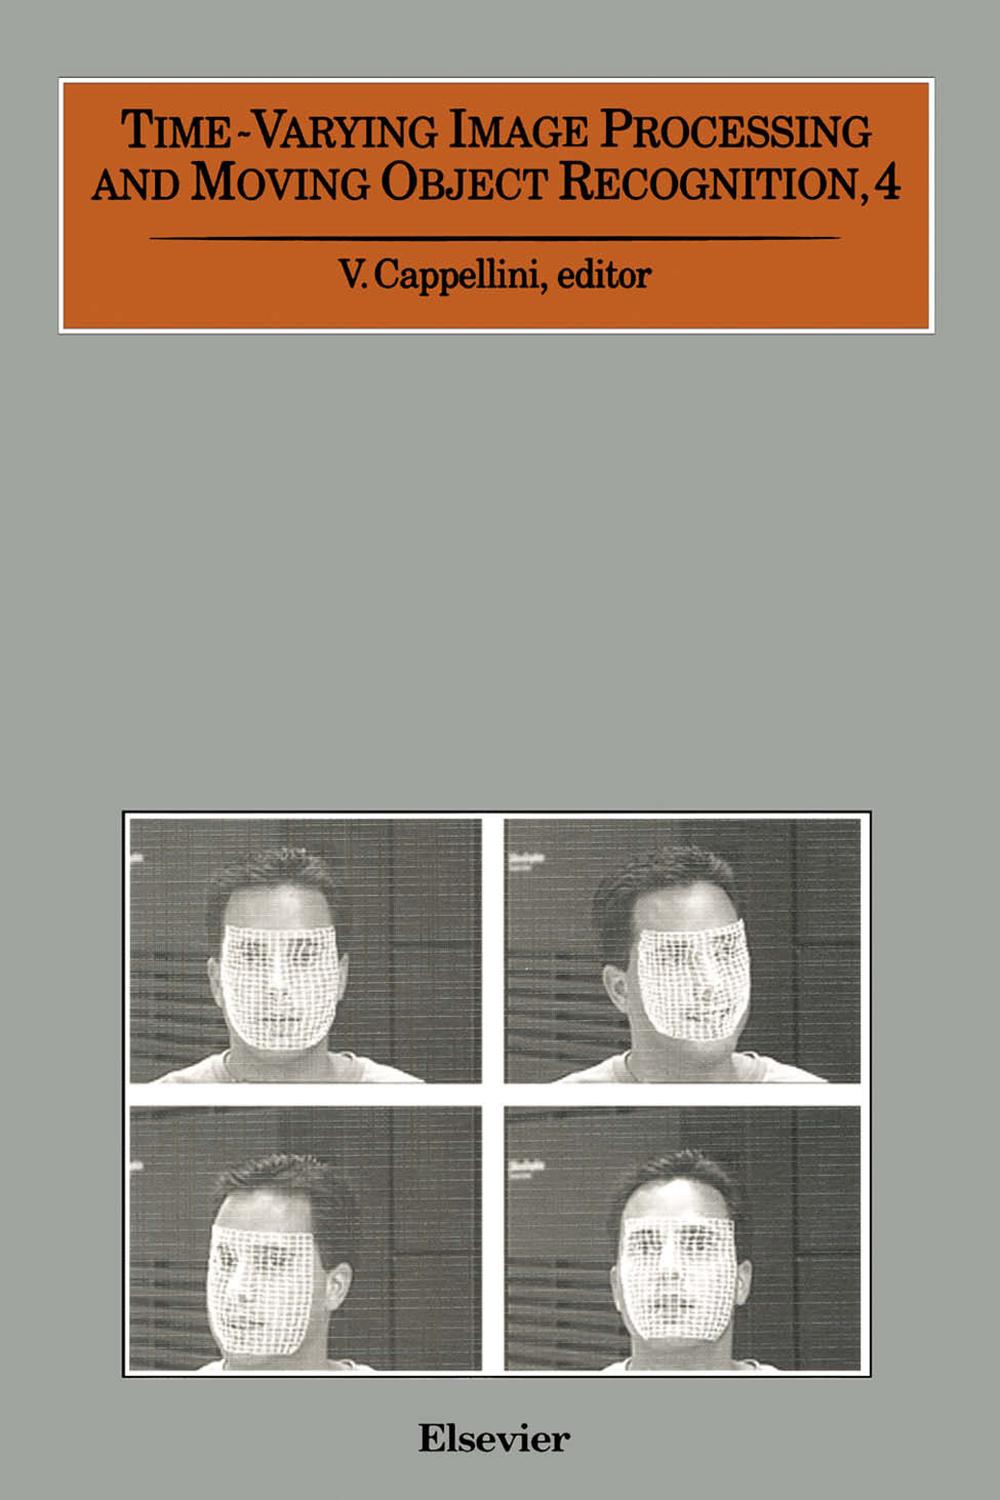 Time-Varying Image Processing and Moving Object Recognition, 4 - V. Cappellini